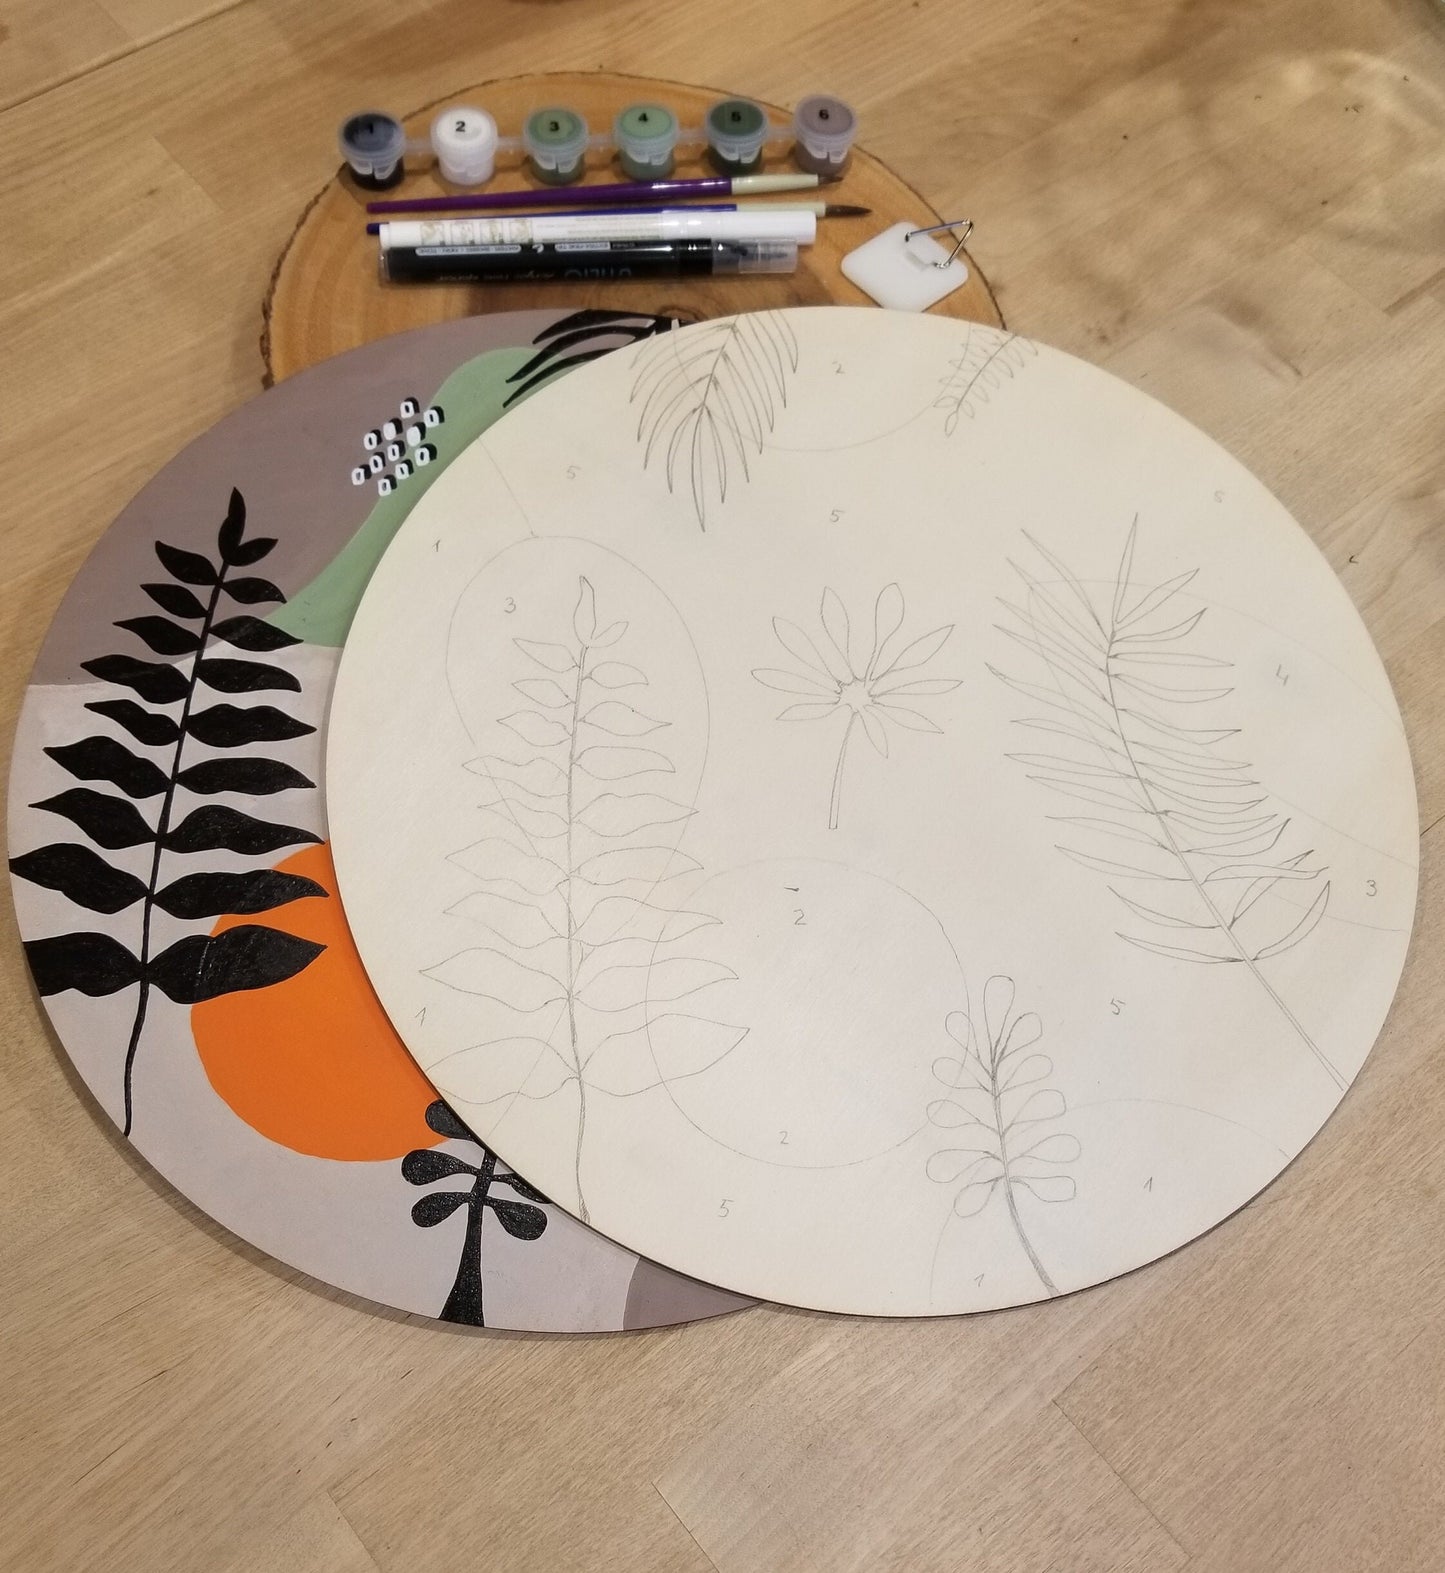 Craft night party, DIY nature painting, Paint and sip kit, DIY paint by numbers